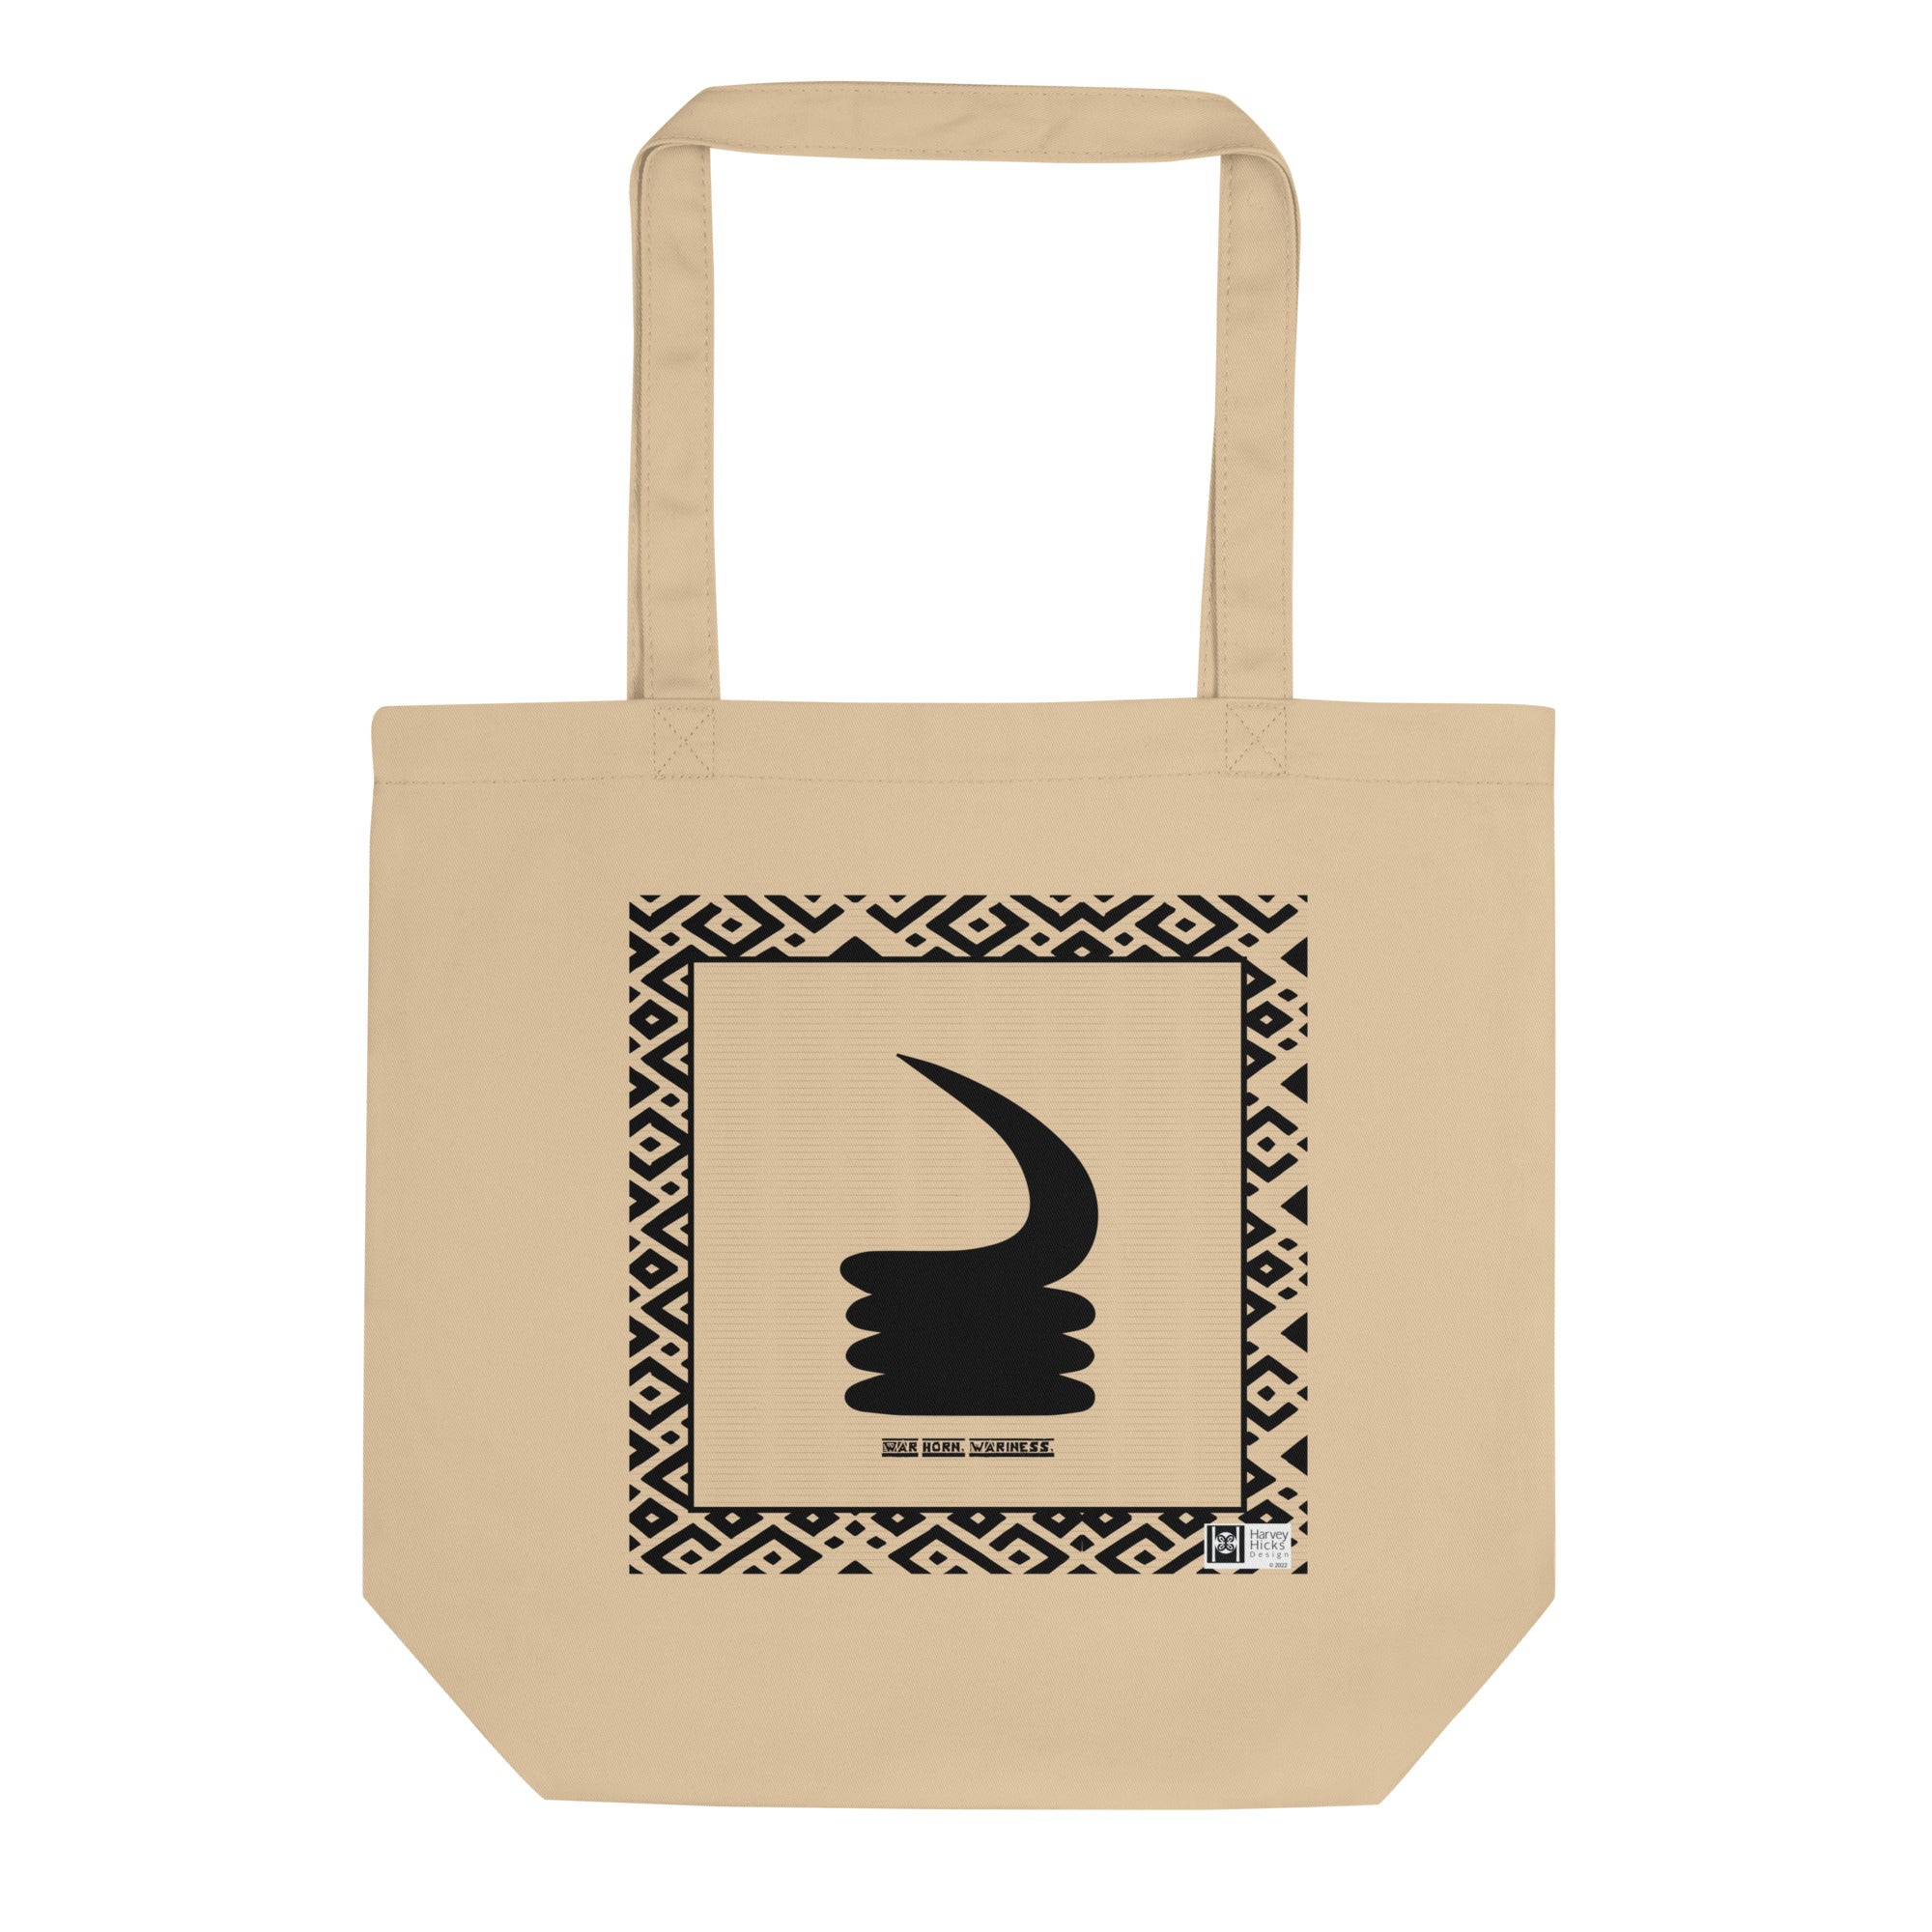 100% cotton Eco Tote Bag, featuring the Adinkra symbol for wariness